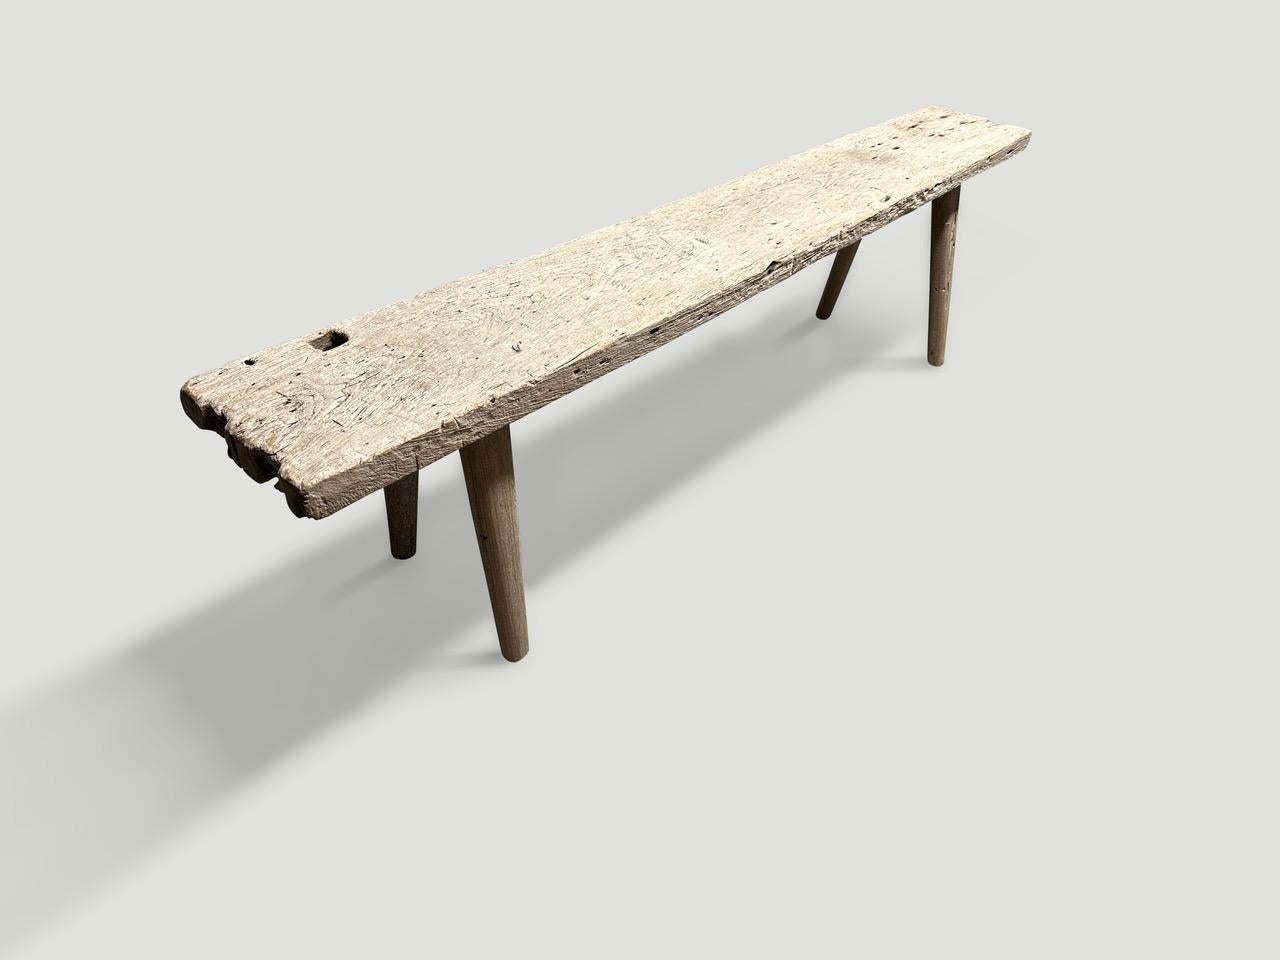 A single thick antique wood panel with lovely character within the wood. We added smooth teak minimalist legs to produce this beautiful bench and finished with a secret ingredient, revealing the unique wood grain. It’s all in the details.

This